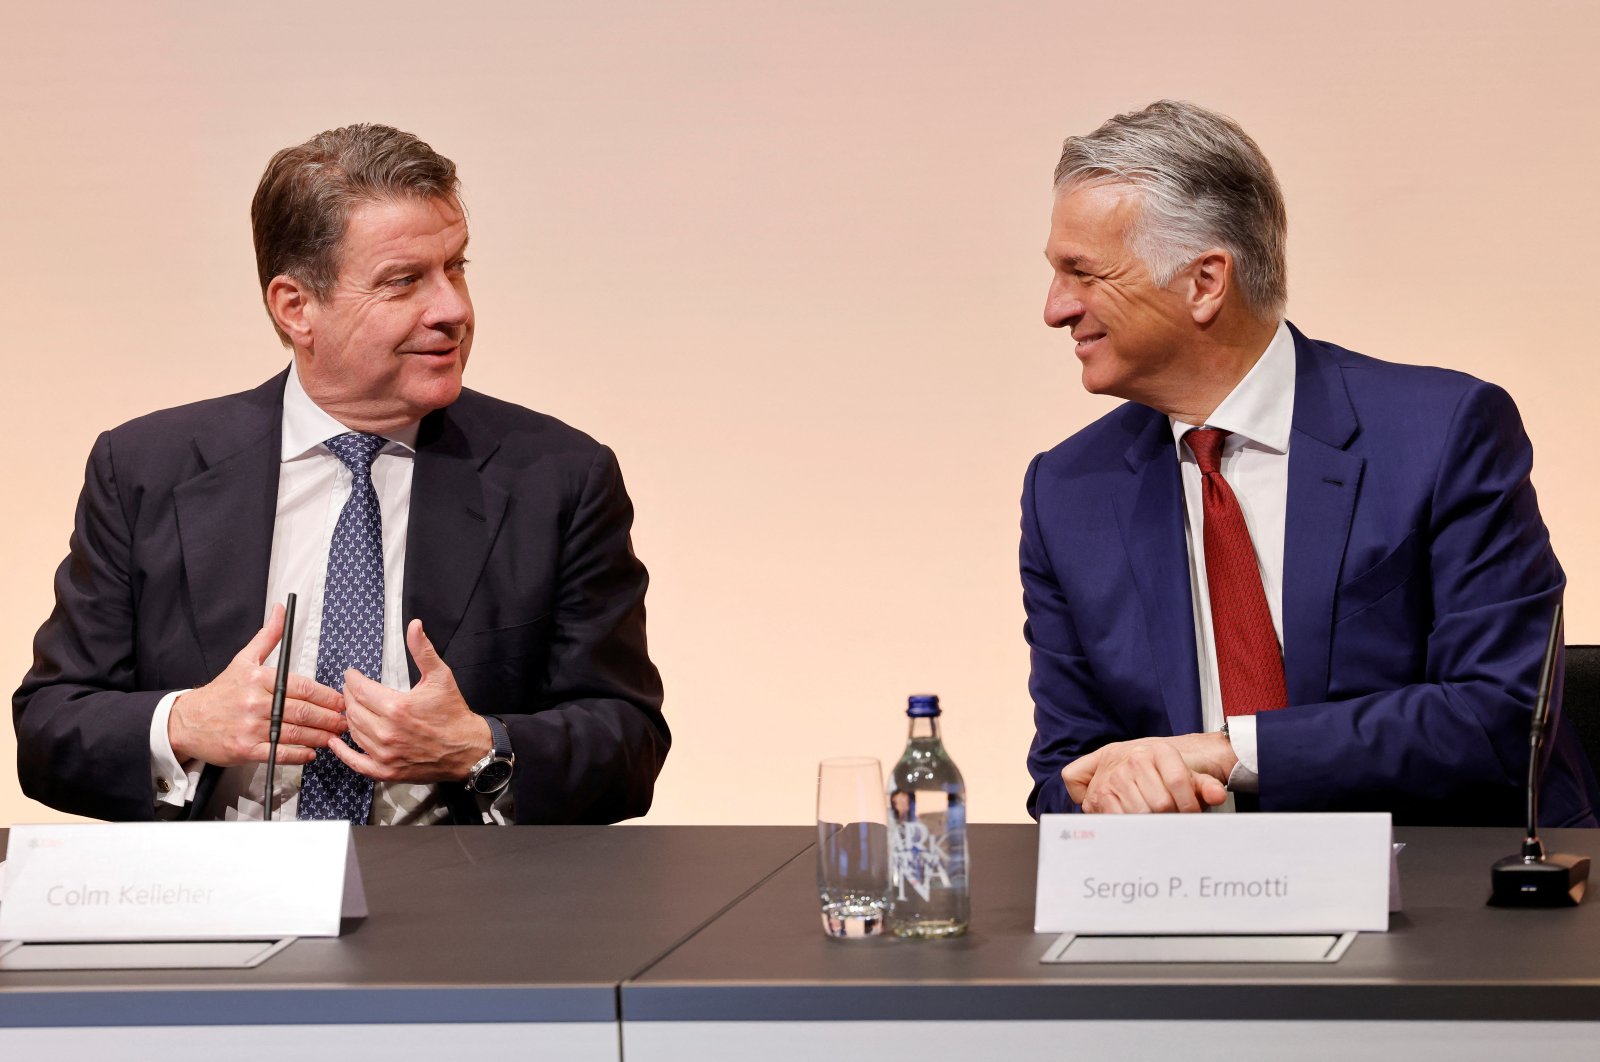 Newly appointed Group Chief Executive Officer of Swiss Bank UBS Sergio Ermotti (R) and UBS Chairperson Colm Kelleher speak during a news conference in Zurich, Switzerland, March 29, 2023. (Reuters Photo)